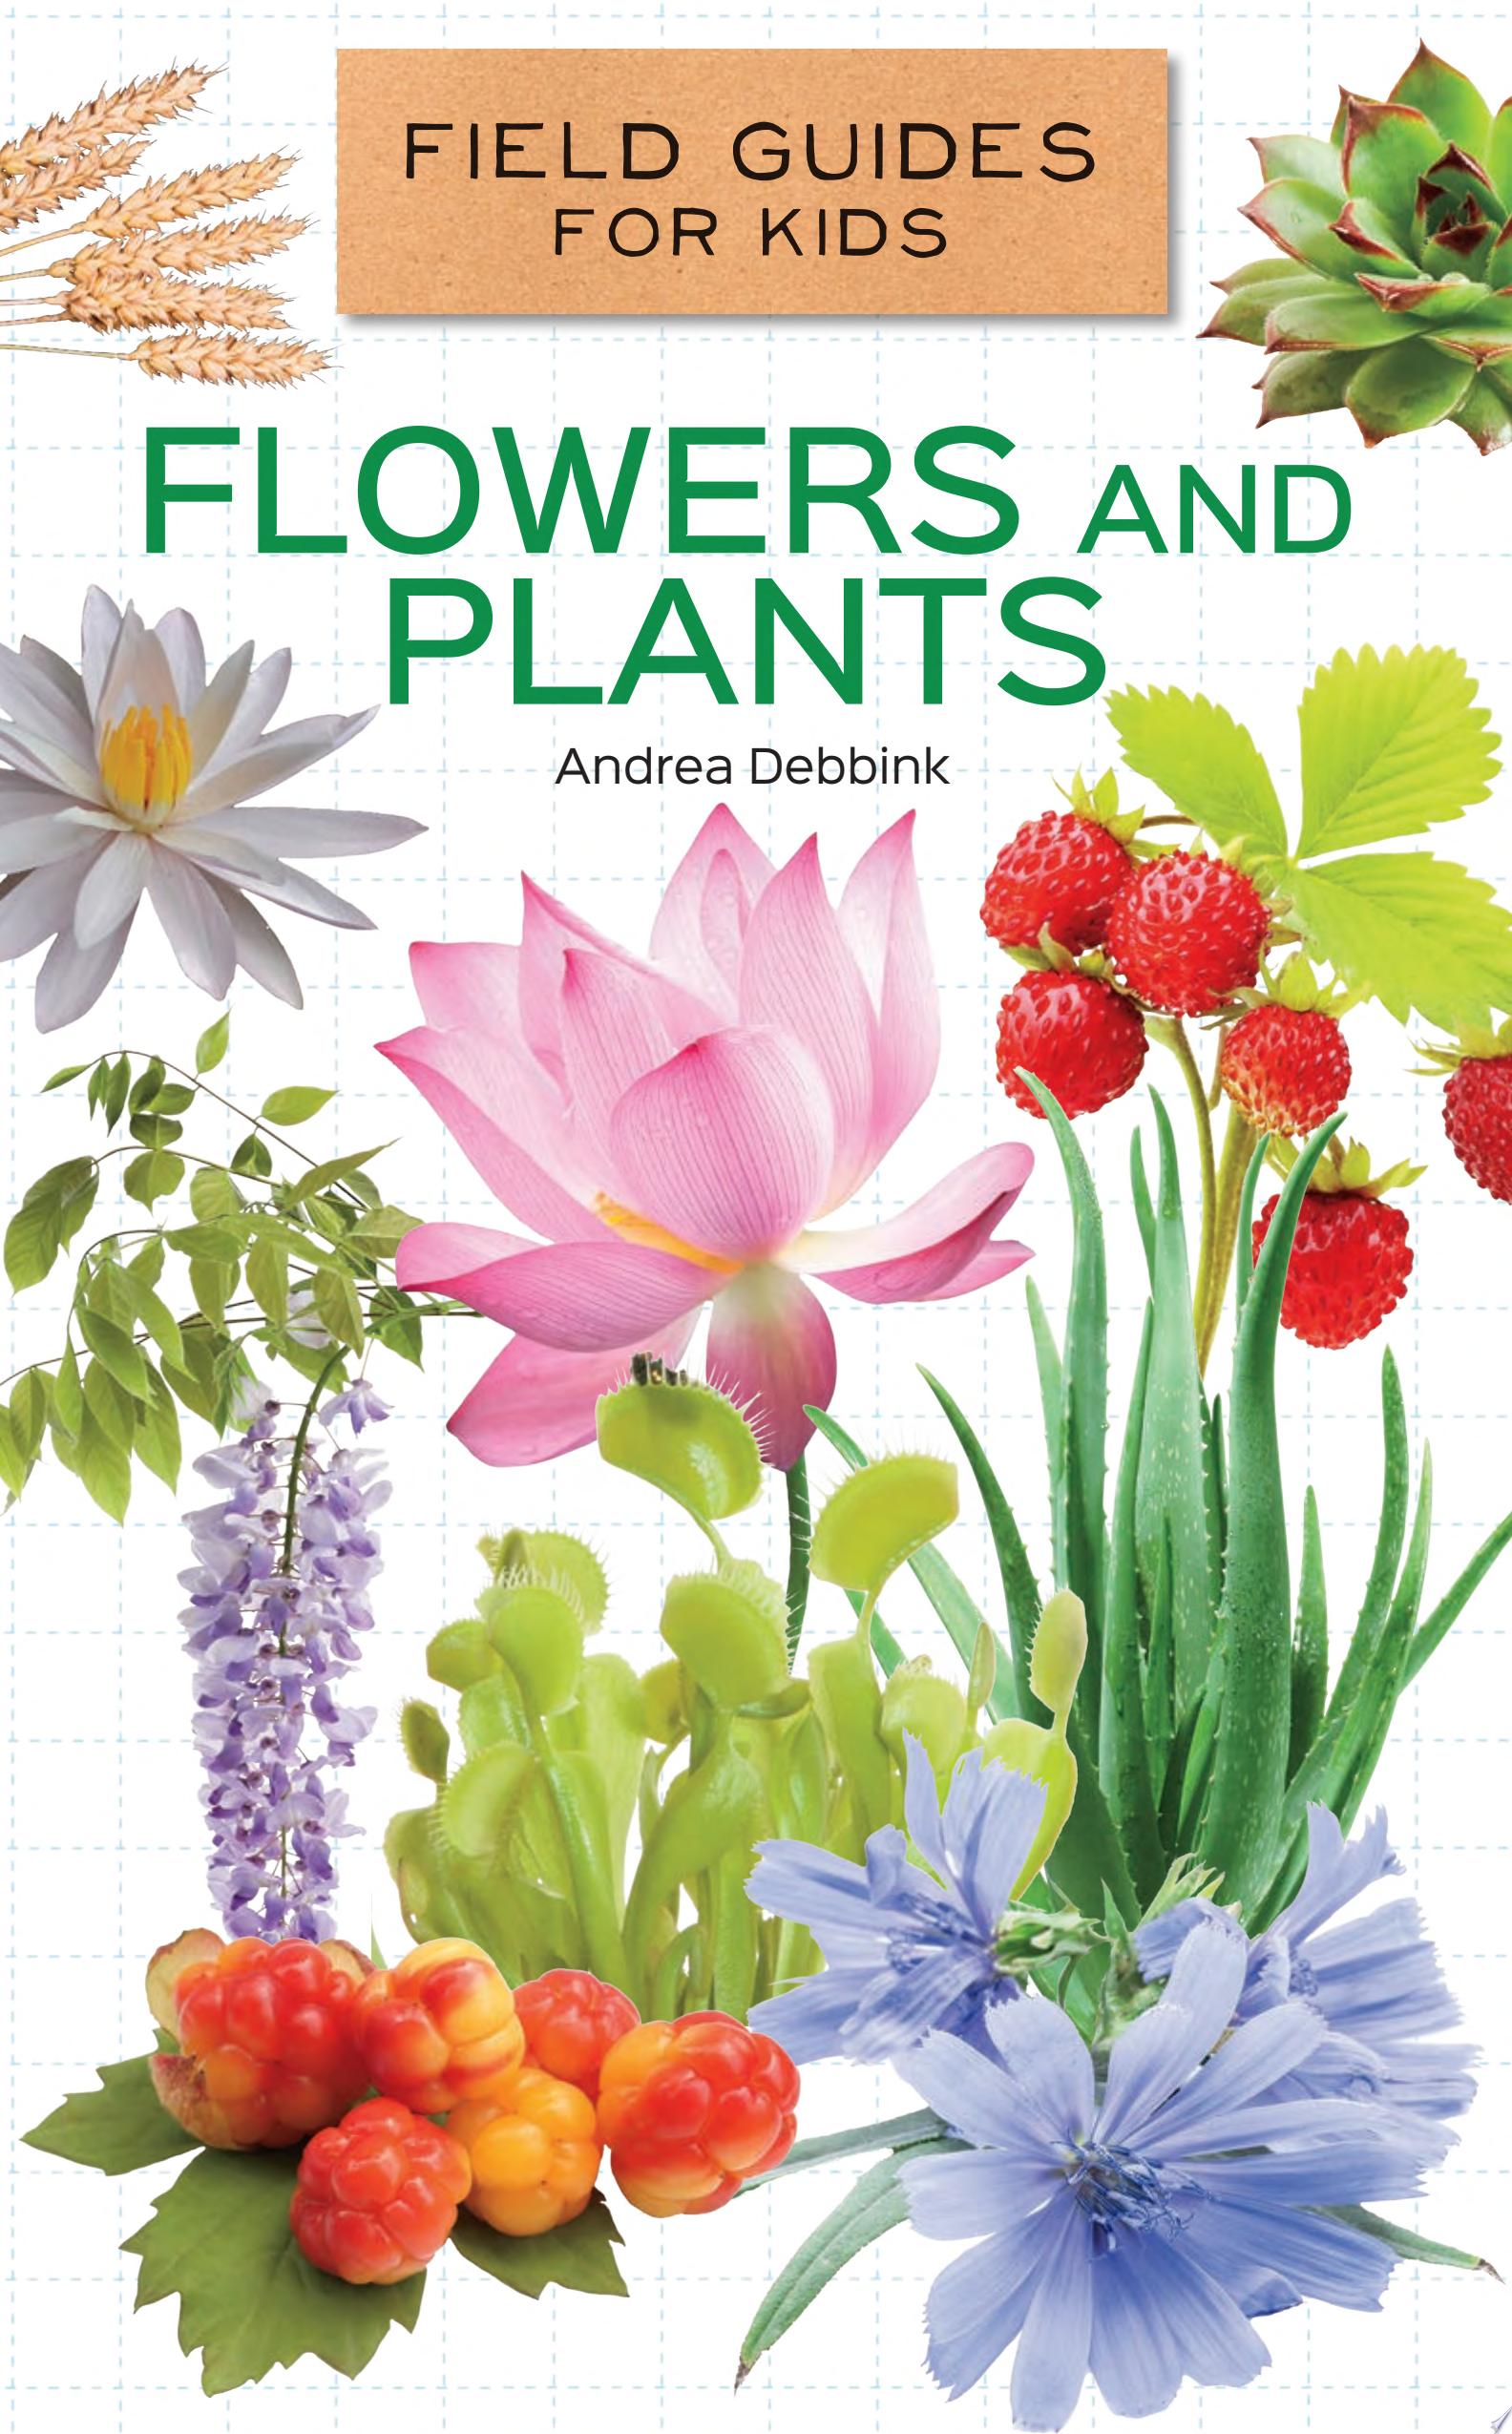 Image for "Flowers and Plants"